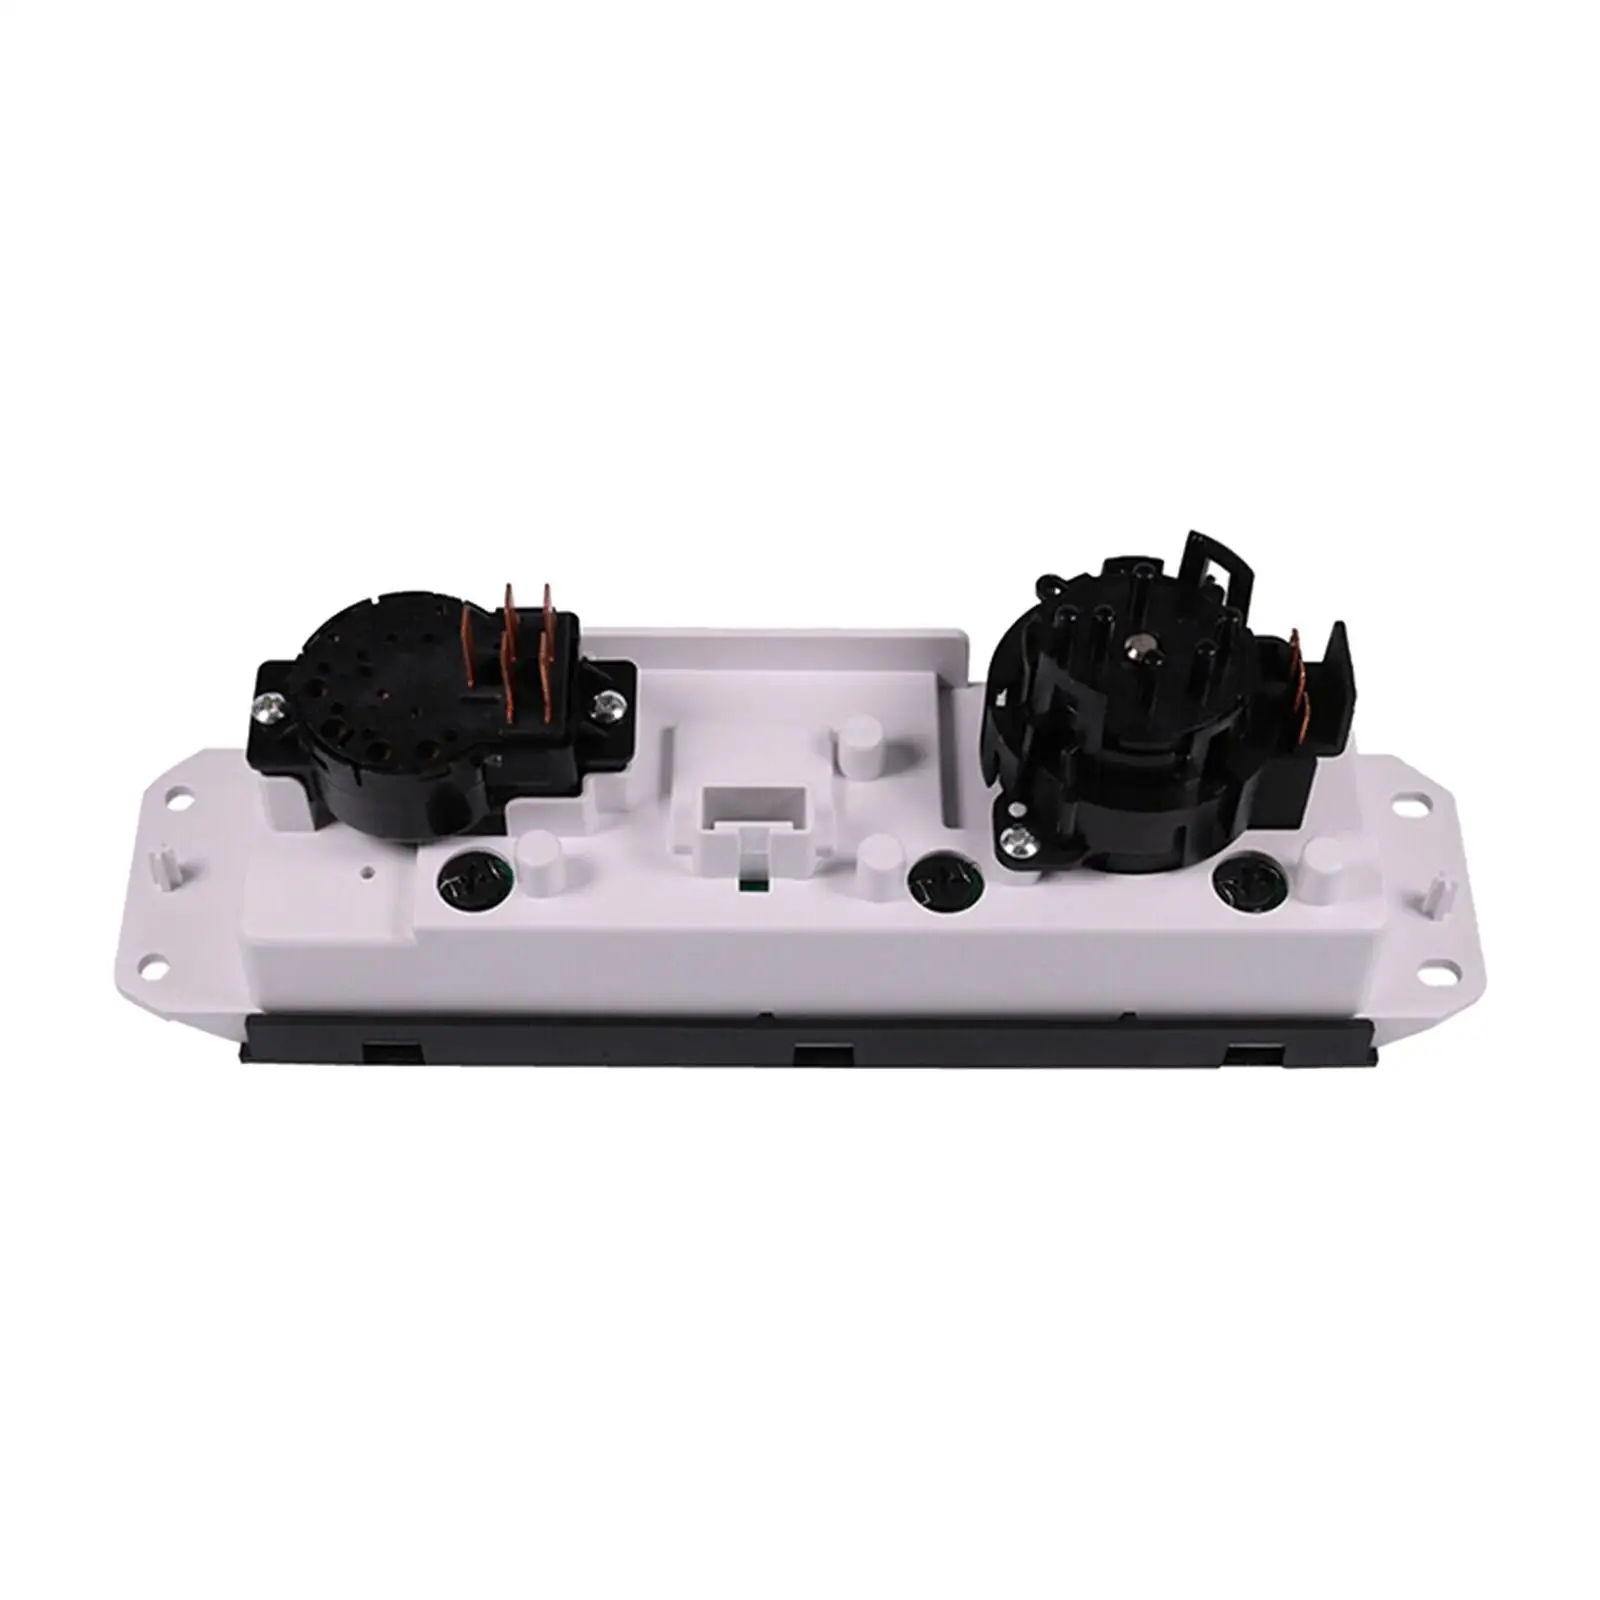 AC Heater Climate Control Switch Unit Replace Parts for Jeep Wrangler